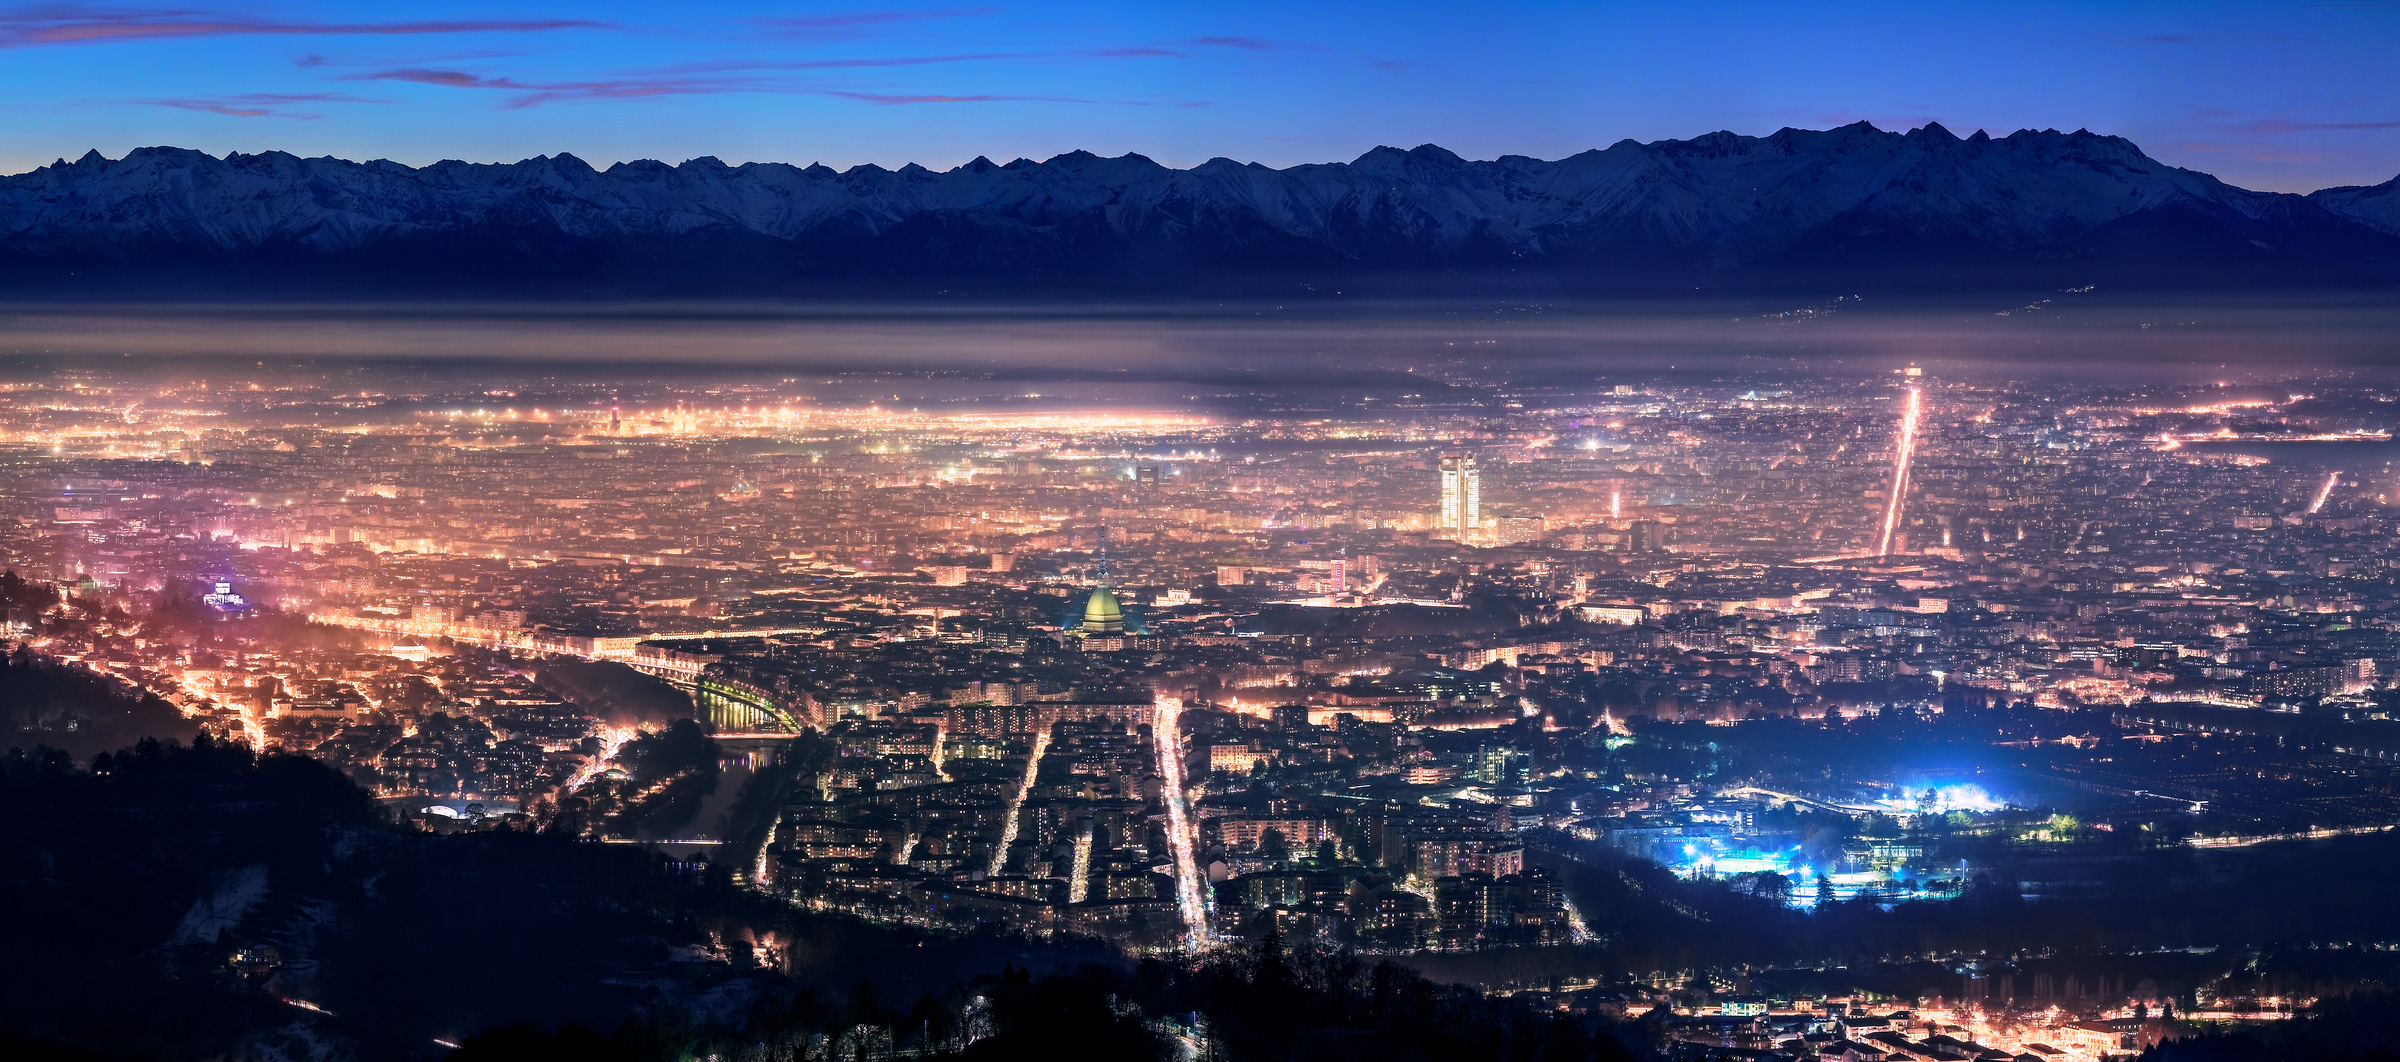 613 megapixels! A very high resolution, large-format VAST photo print of Turin, Italy at night; photograph created by Duilio Fiorille in Turin, Piedmont, Italy.